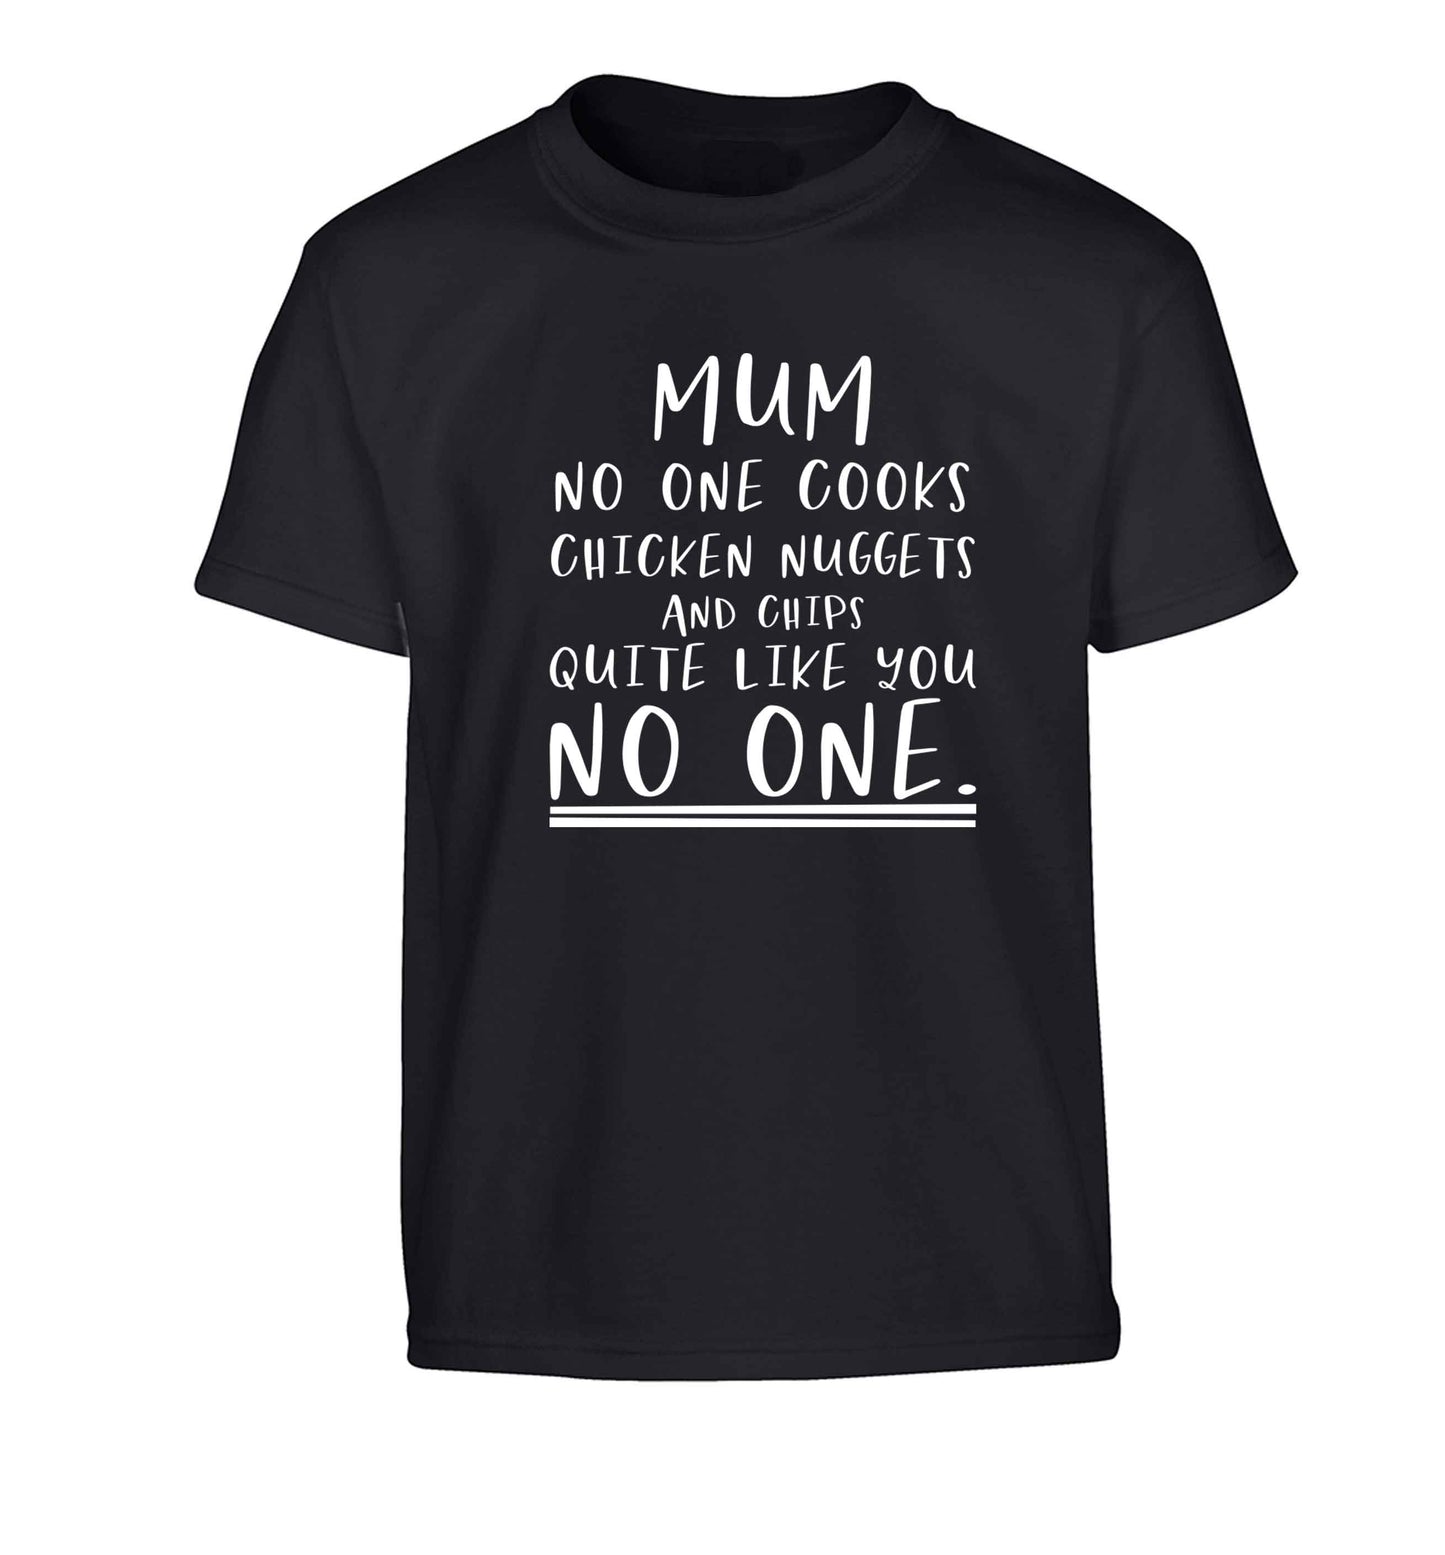 Super funny sassy gift for mother's day or birthday!  Mum no one cooks chicken nuggets and chips like you no one Children's black Tshirt 12-13 Years